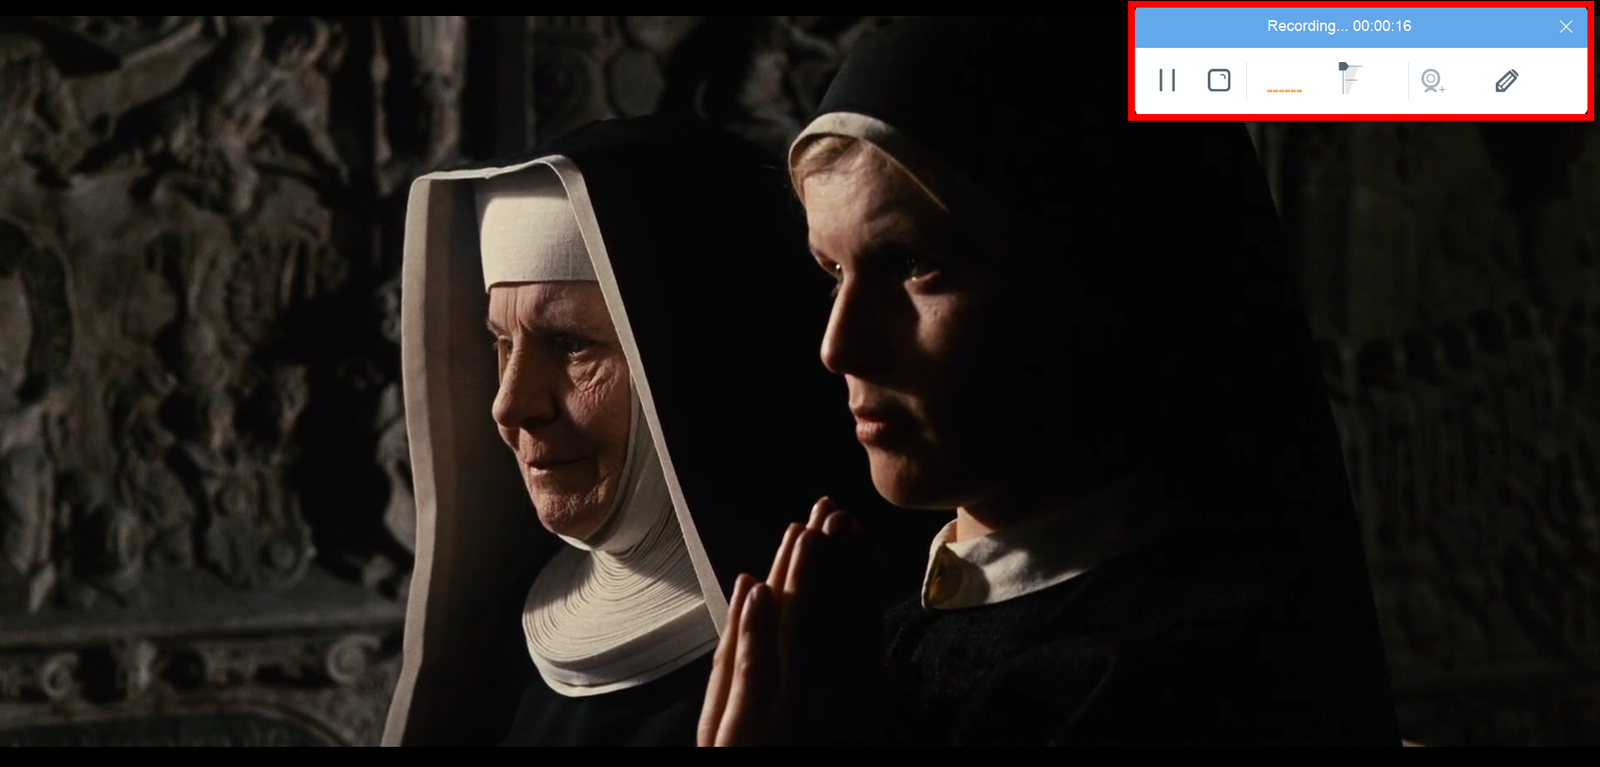 download the sound of music, screen record movie